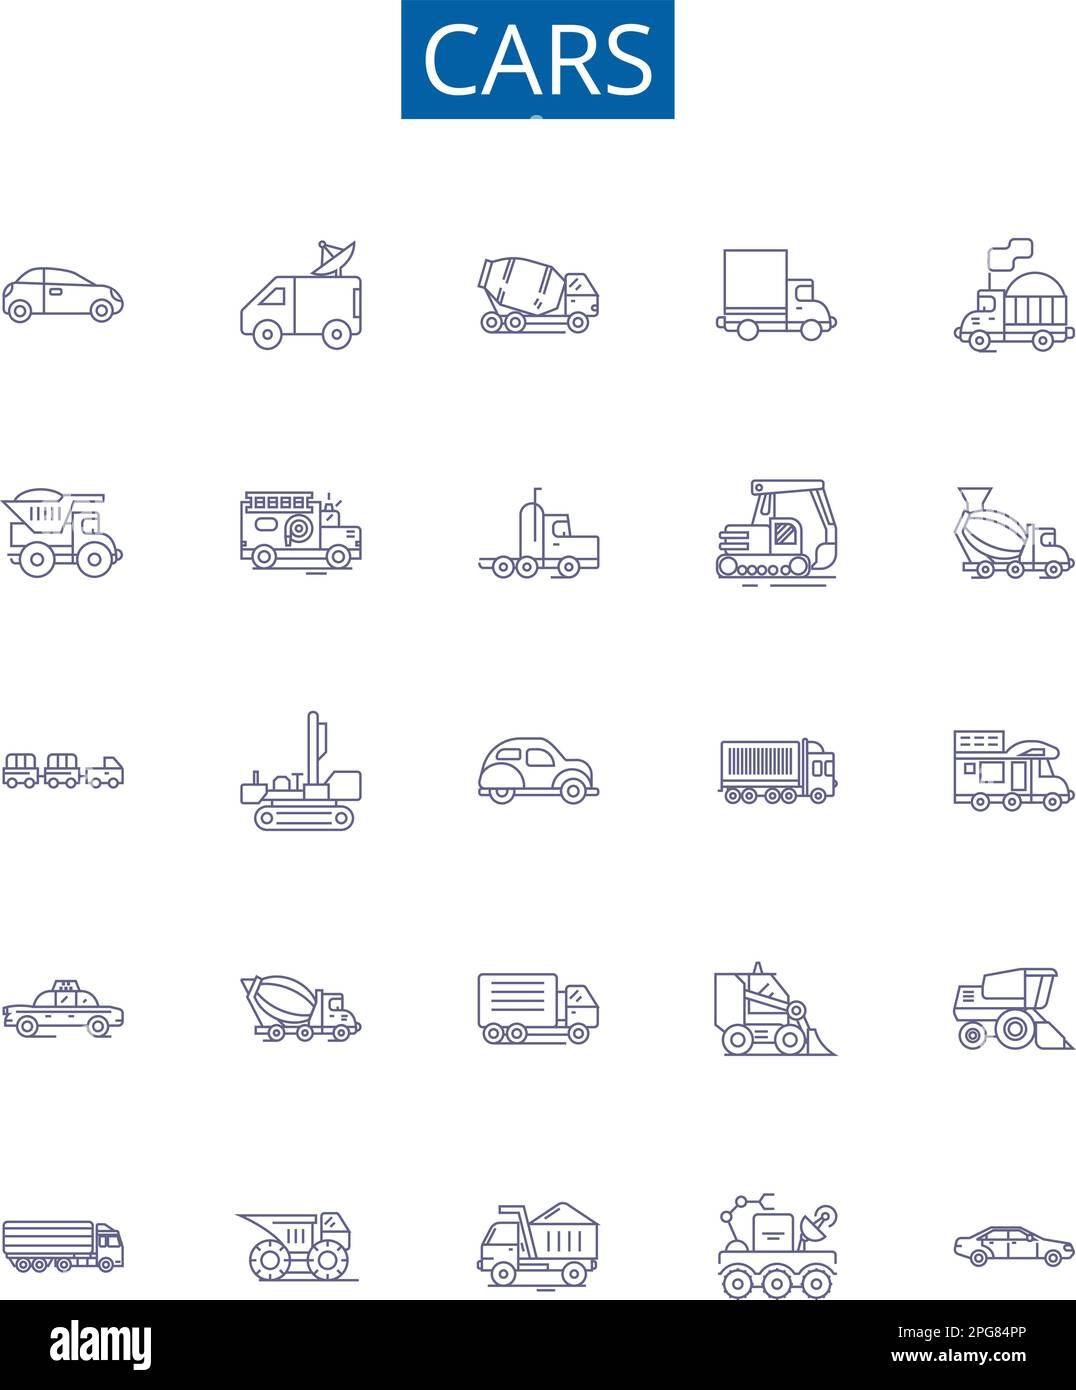 Cars line icons signs set. Design collection of Automobile, Sedan, SUV, Crossover, Hatchback, Convertible, Coupe, Hybrid outline concept vector Stock Vector